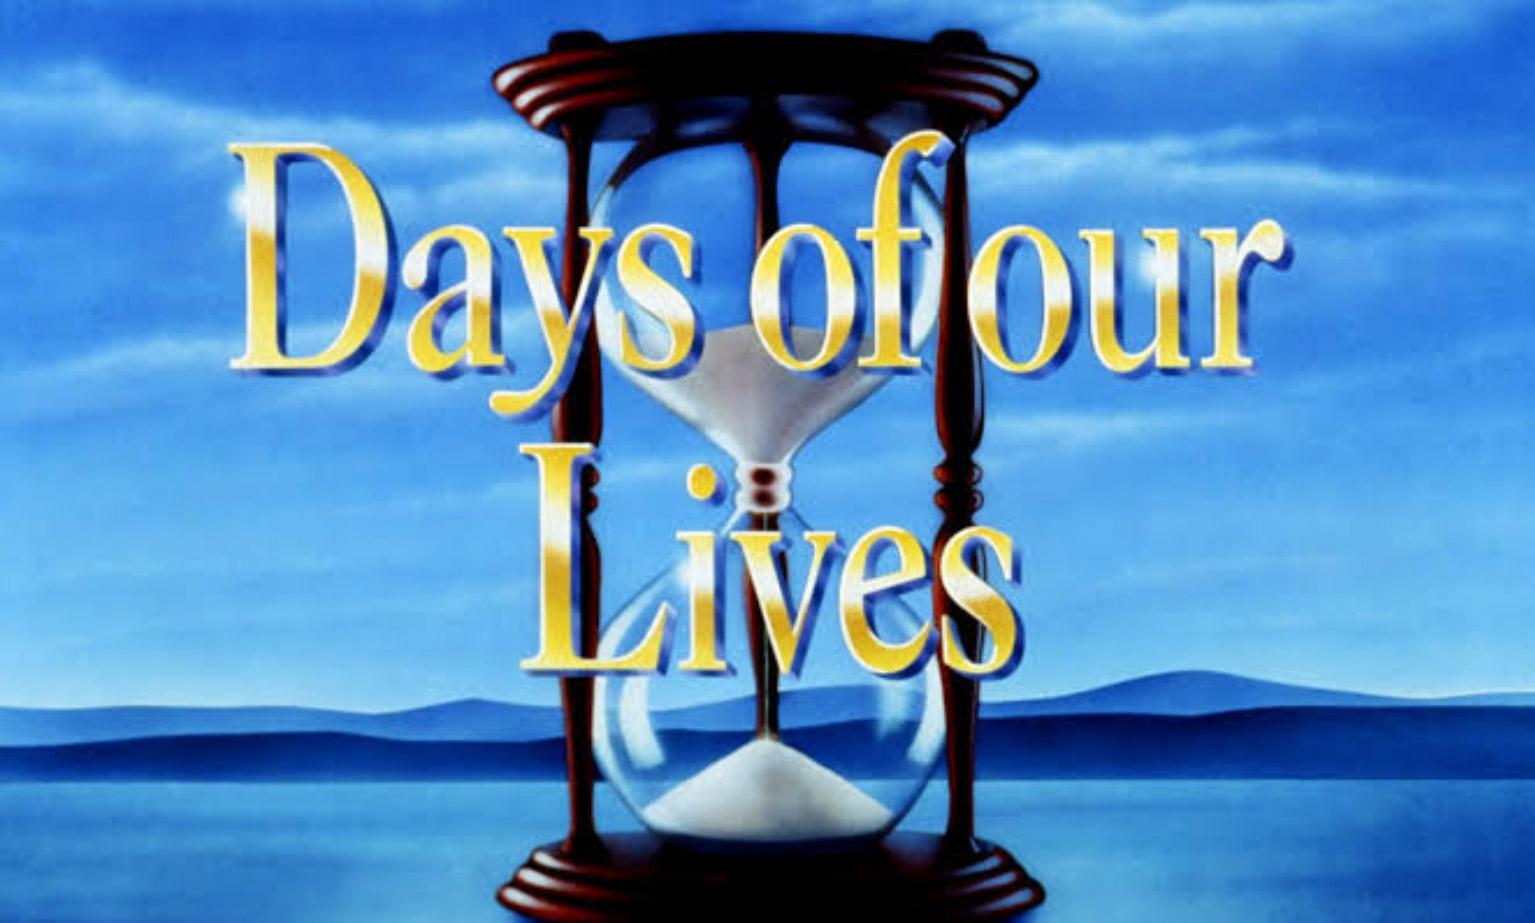 Daytime Drama "Days of Our Lives" Makes Historic Move to Peacock